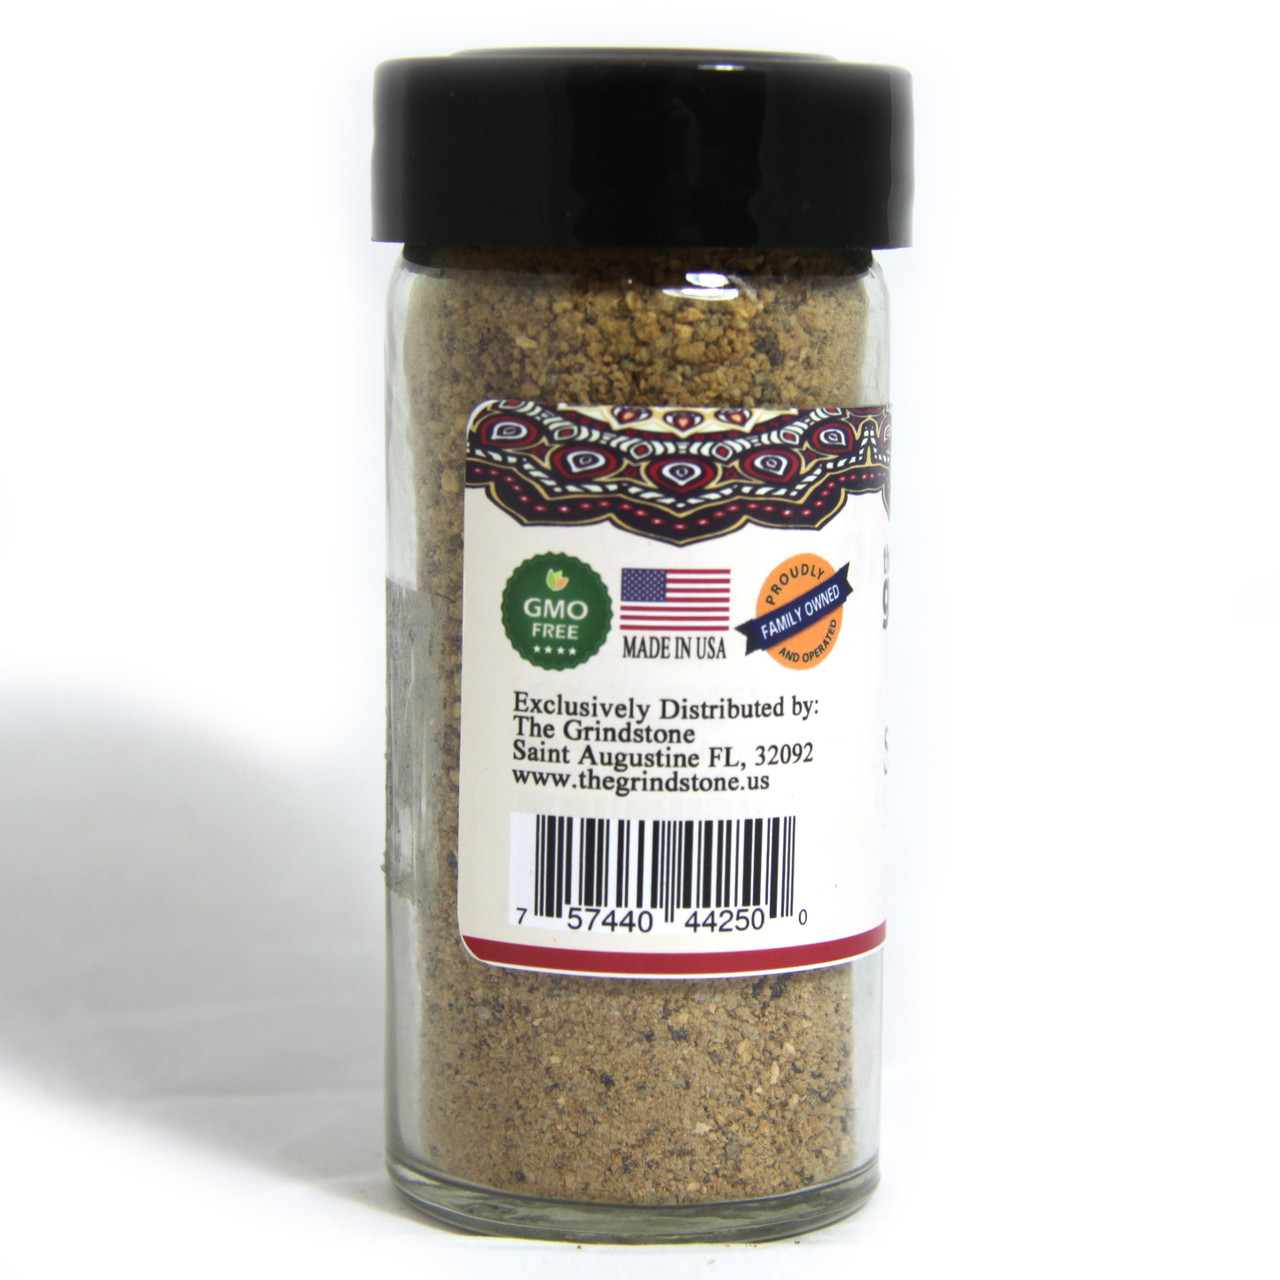 Poultry Seasoning, Glass Bottle with sifter, Non GMO, 1/2 cup, 3.2 oz. -  The Grindstone